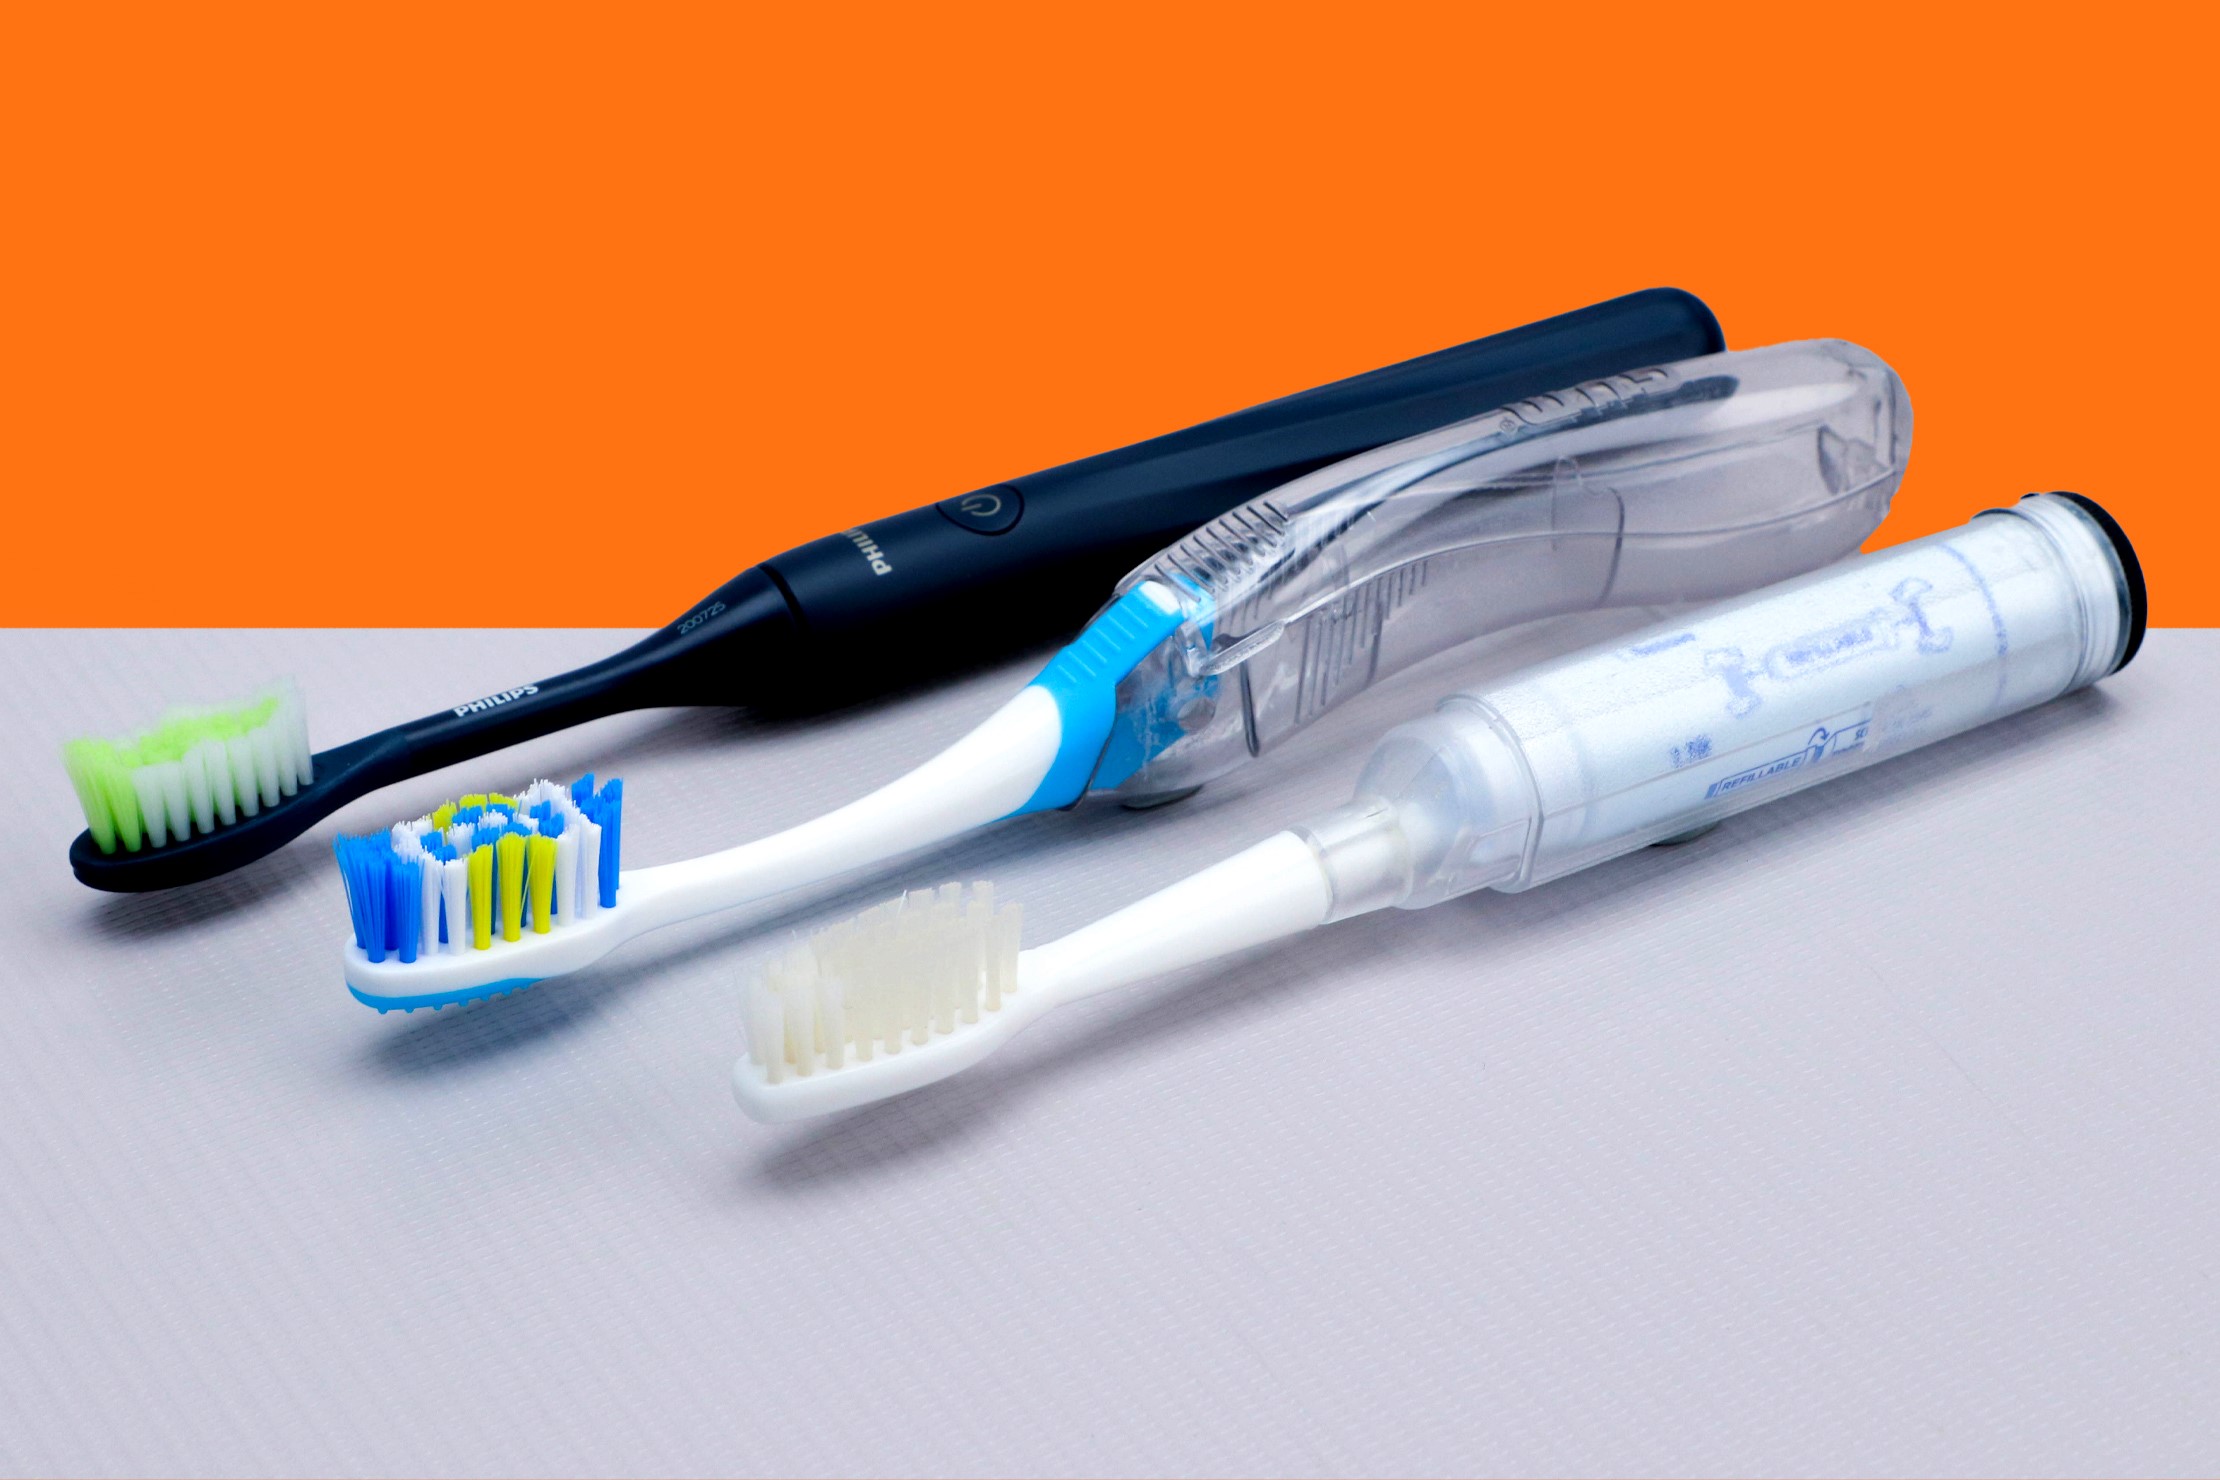 The Top 15 Electric Toothbrushes for Travel